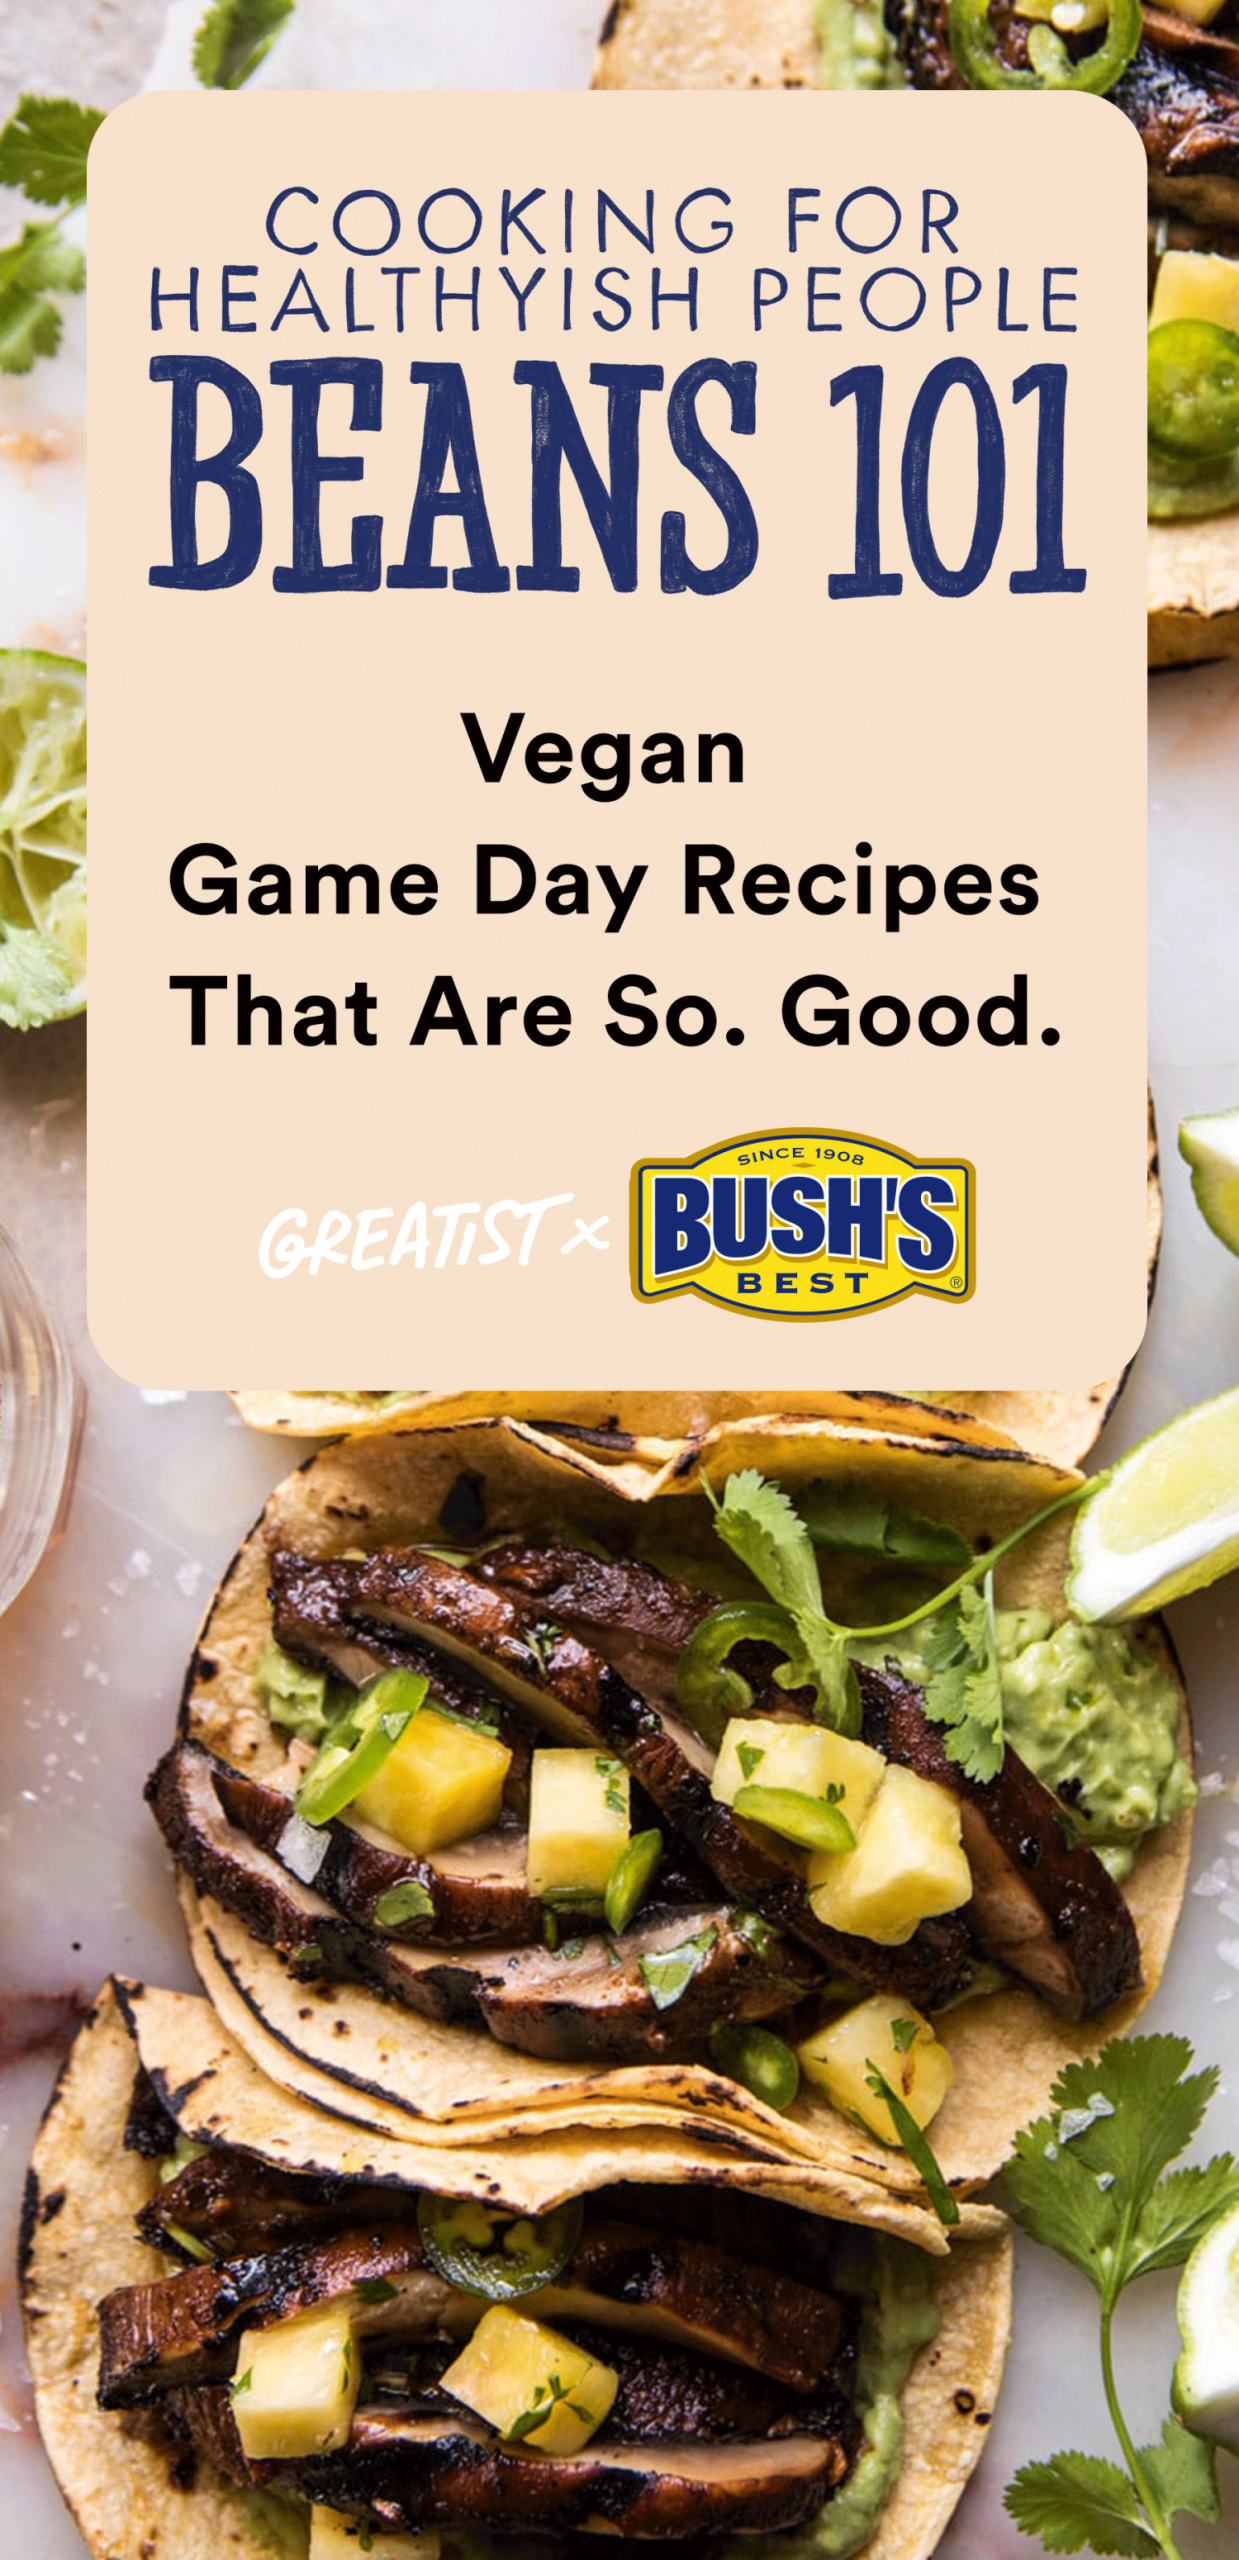 Vegetarian Game Day Recipes
 7 Vegan Game Day Recipes That Are So Good